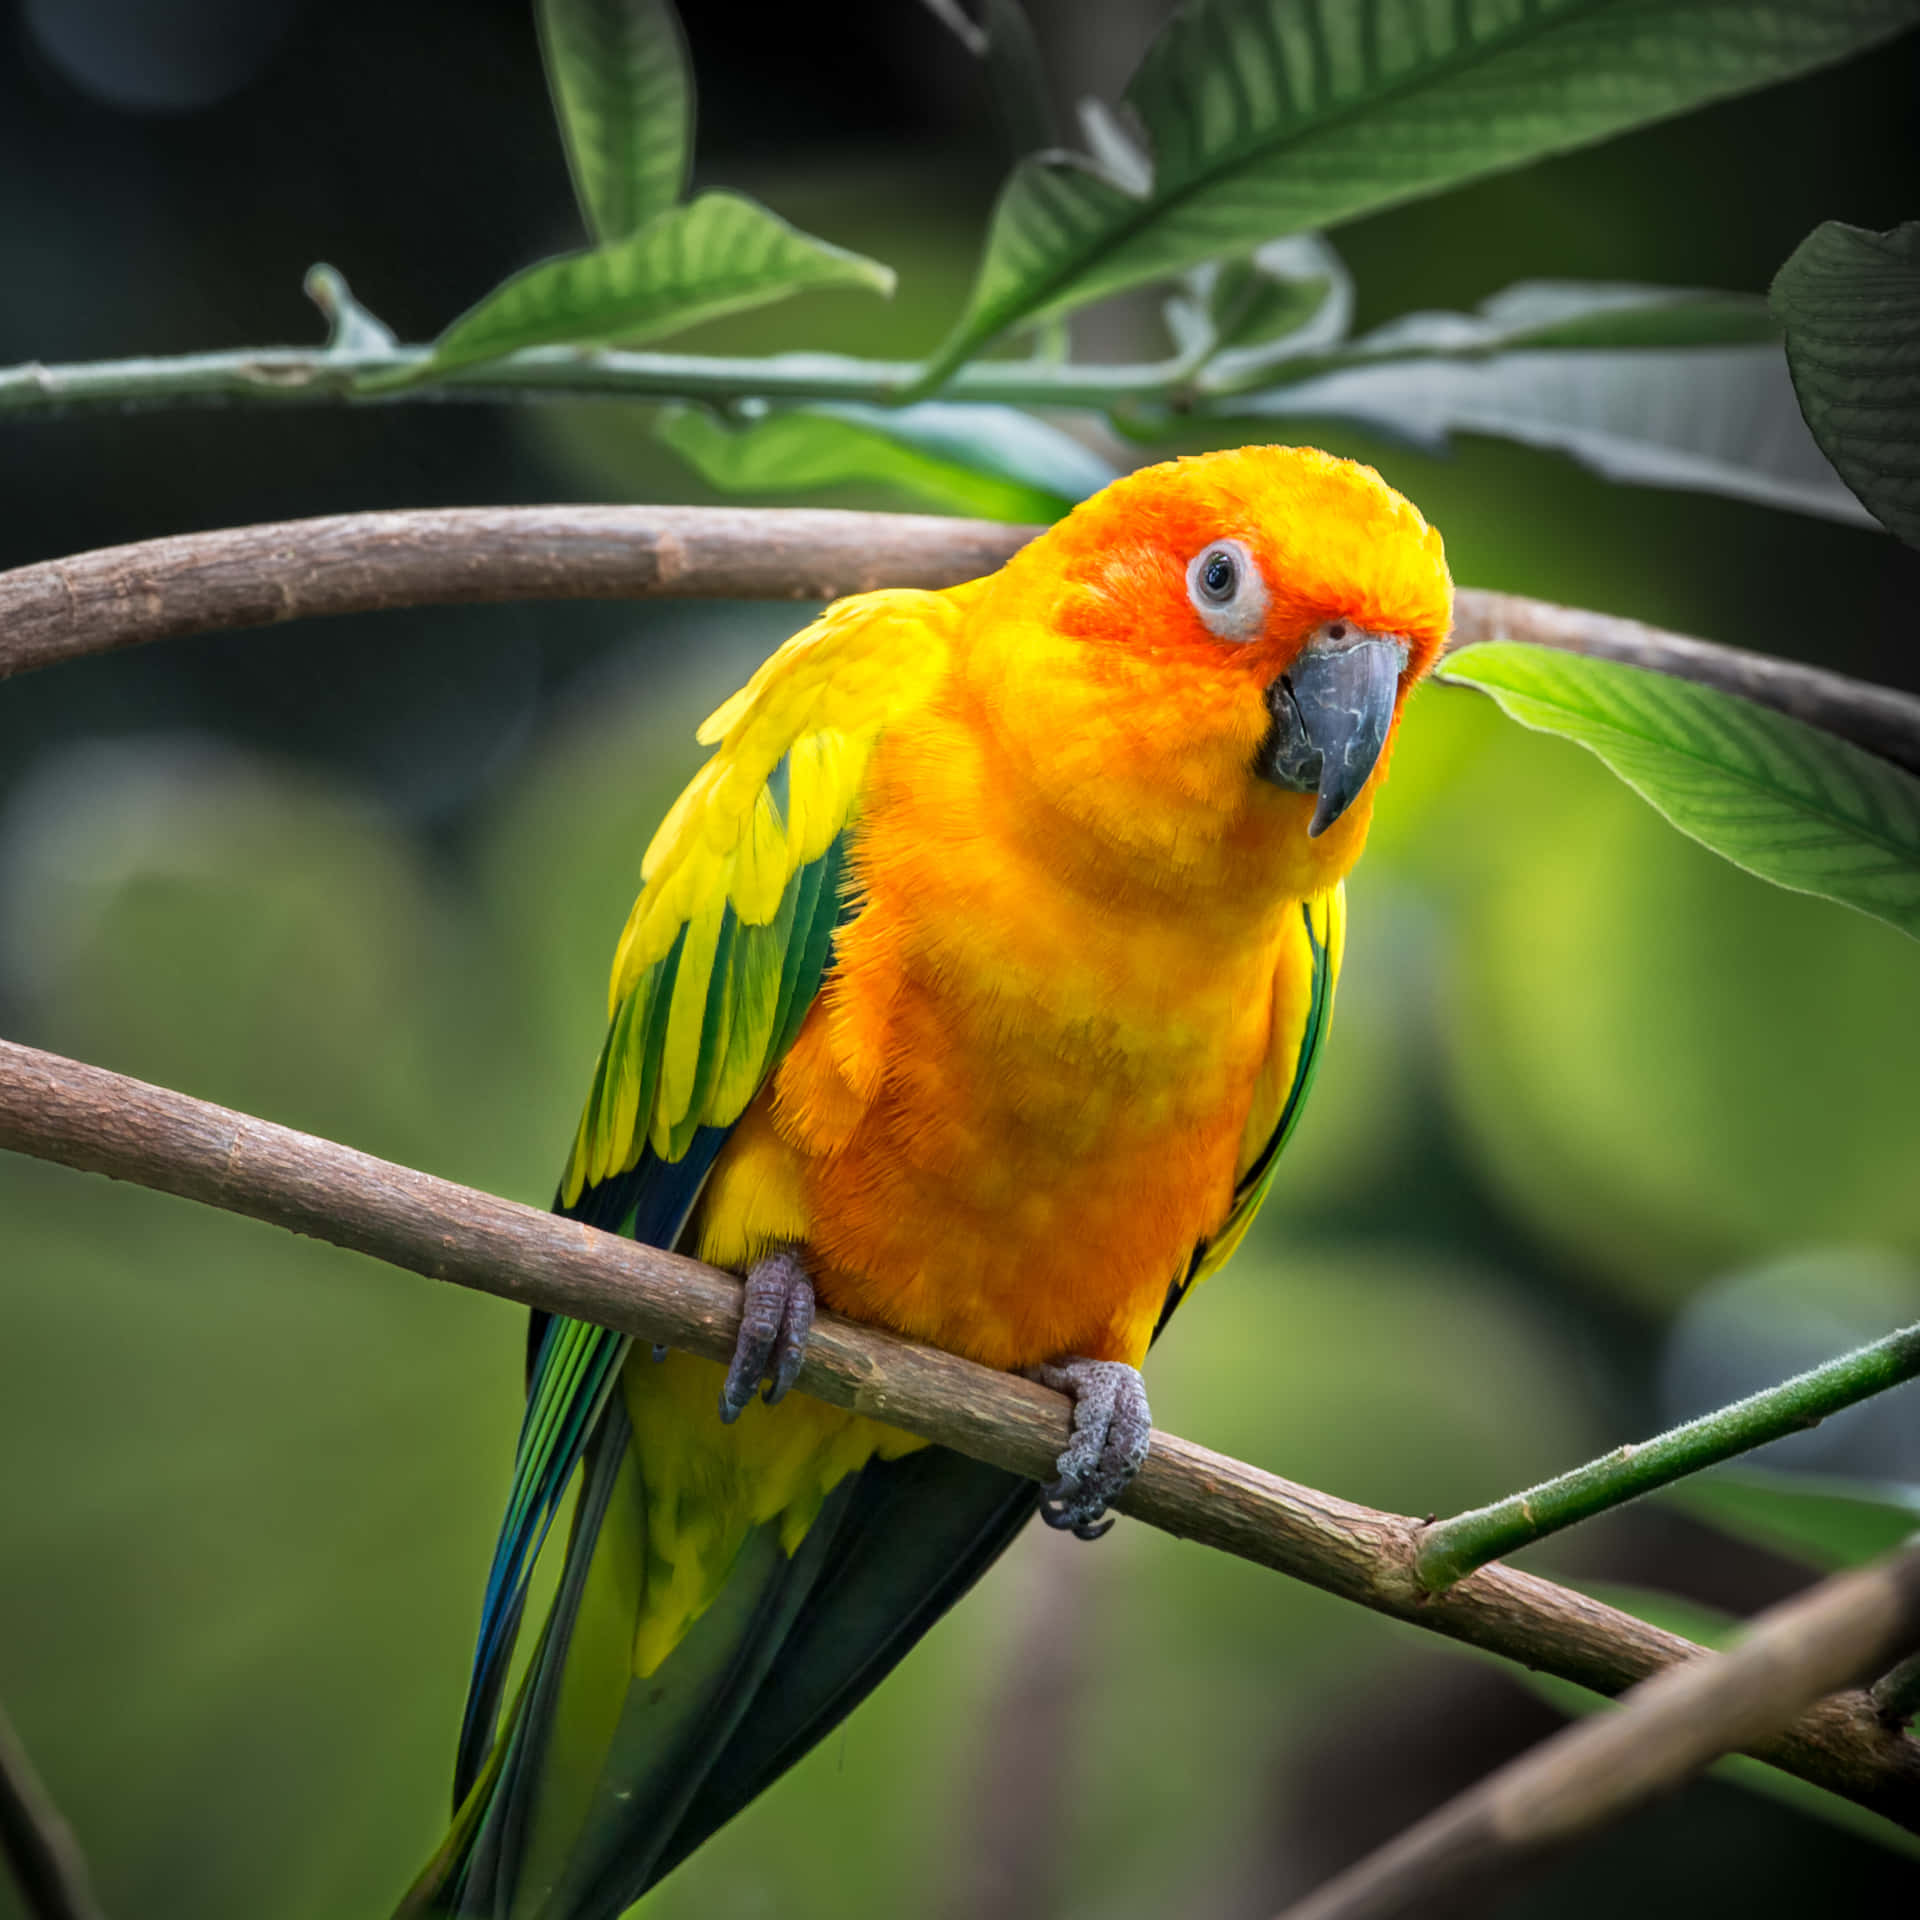 A Yellow And Green Parrot Sitting On A Branch